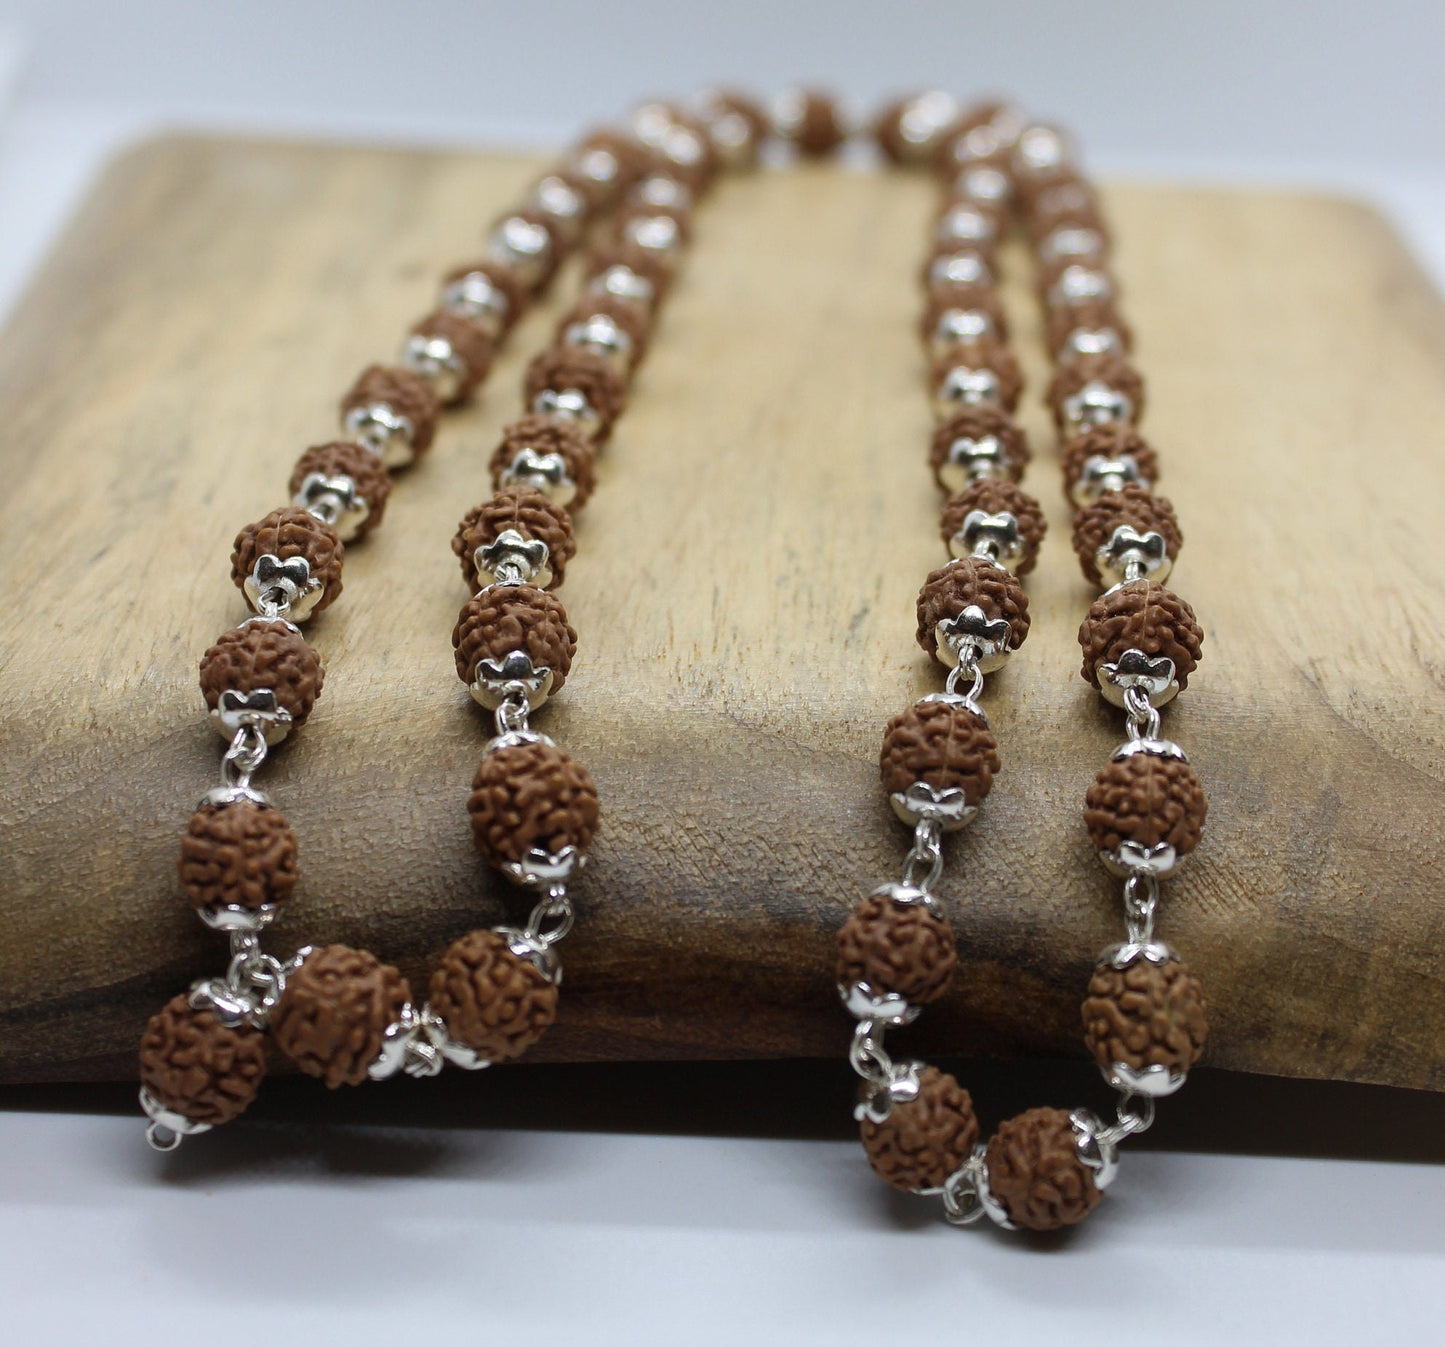 5 Mukhi Rudraksha, Indonesian Beads 925 silver cap Mala, 54 beads Rudraksh Mala Necklace, 8 mm rudraksha Genuine Beads wire wrapped necklace